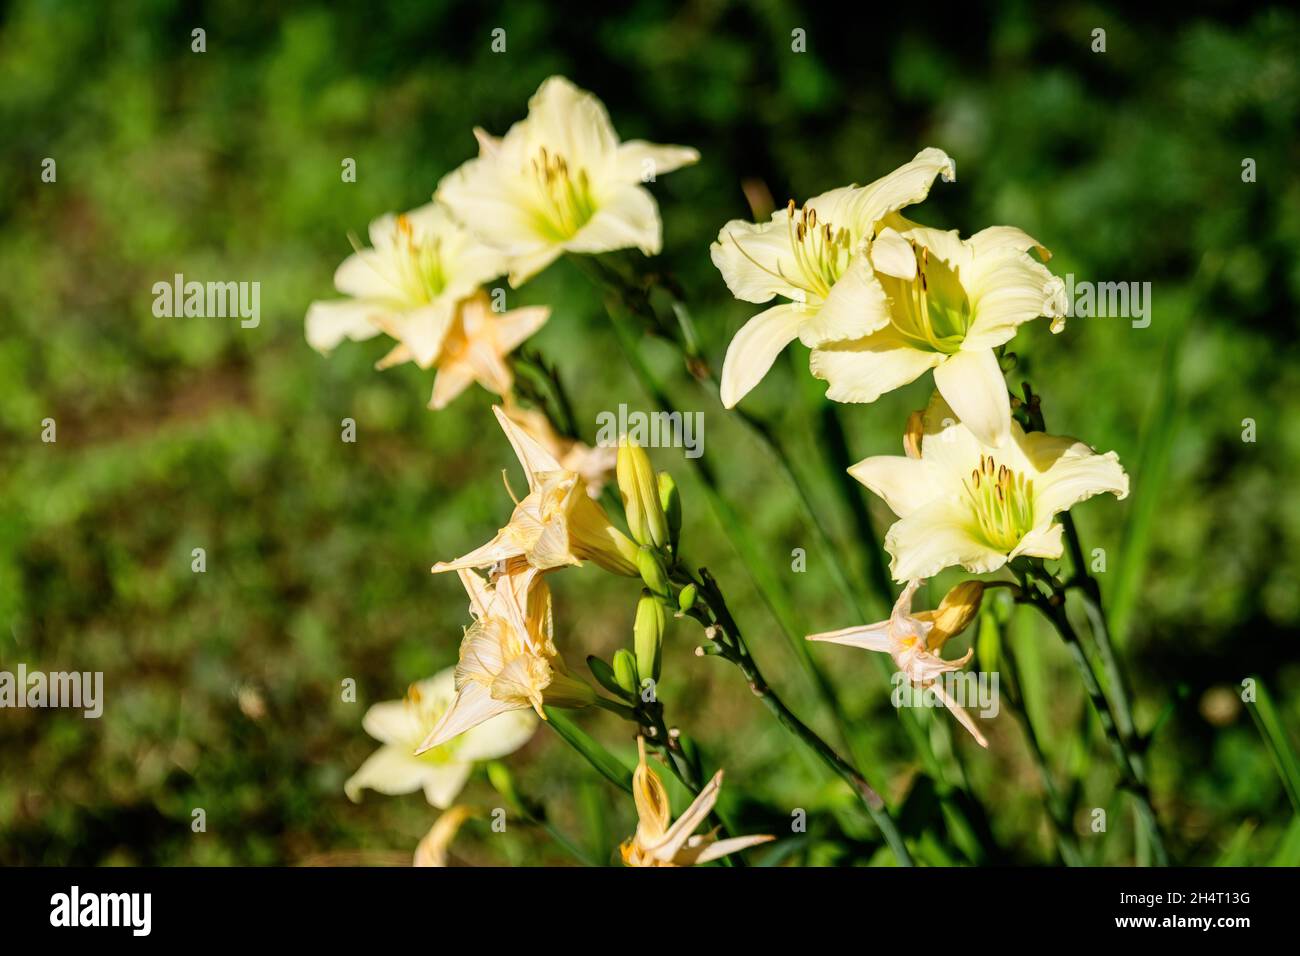 Ivory white flowers of Hemerocallis Arctic Snow plant, know as daylily, Lilium or Lily plant in a British cottage style garden in a sunny summer day, Stock Photo